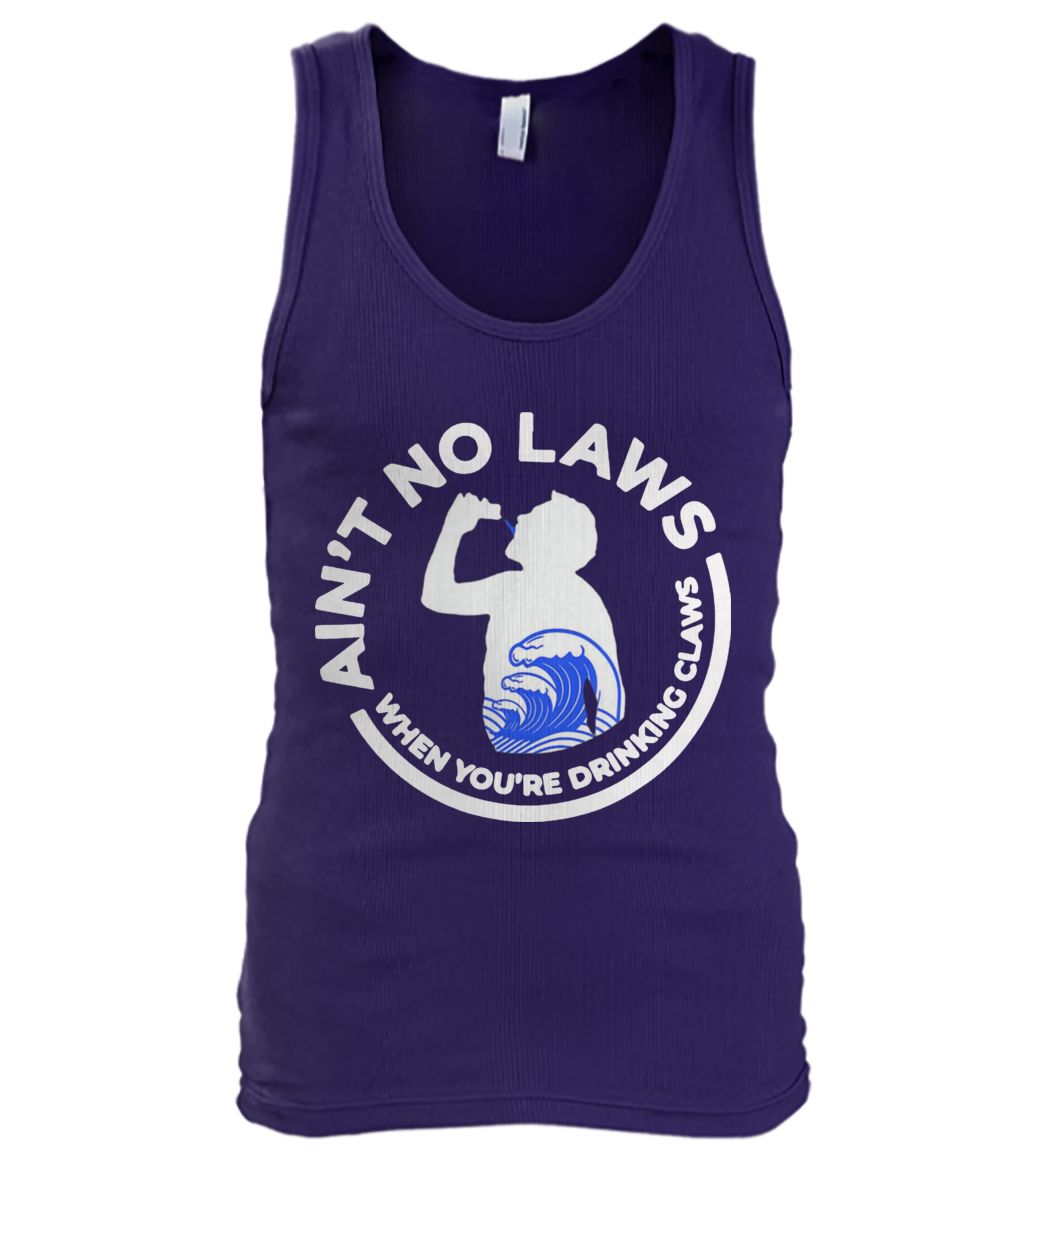 Trump ain't no laws when you are drinking claws men's tank top